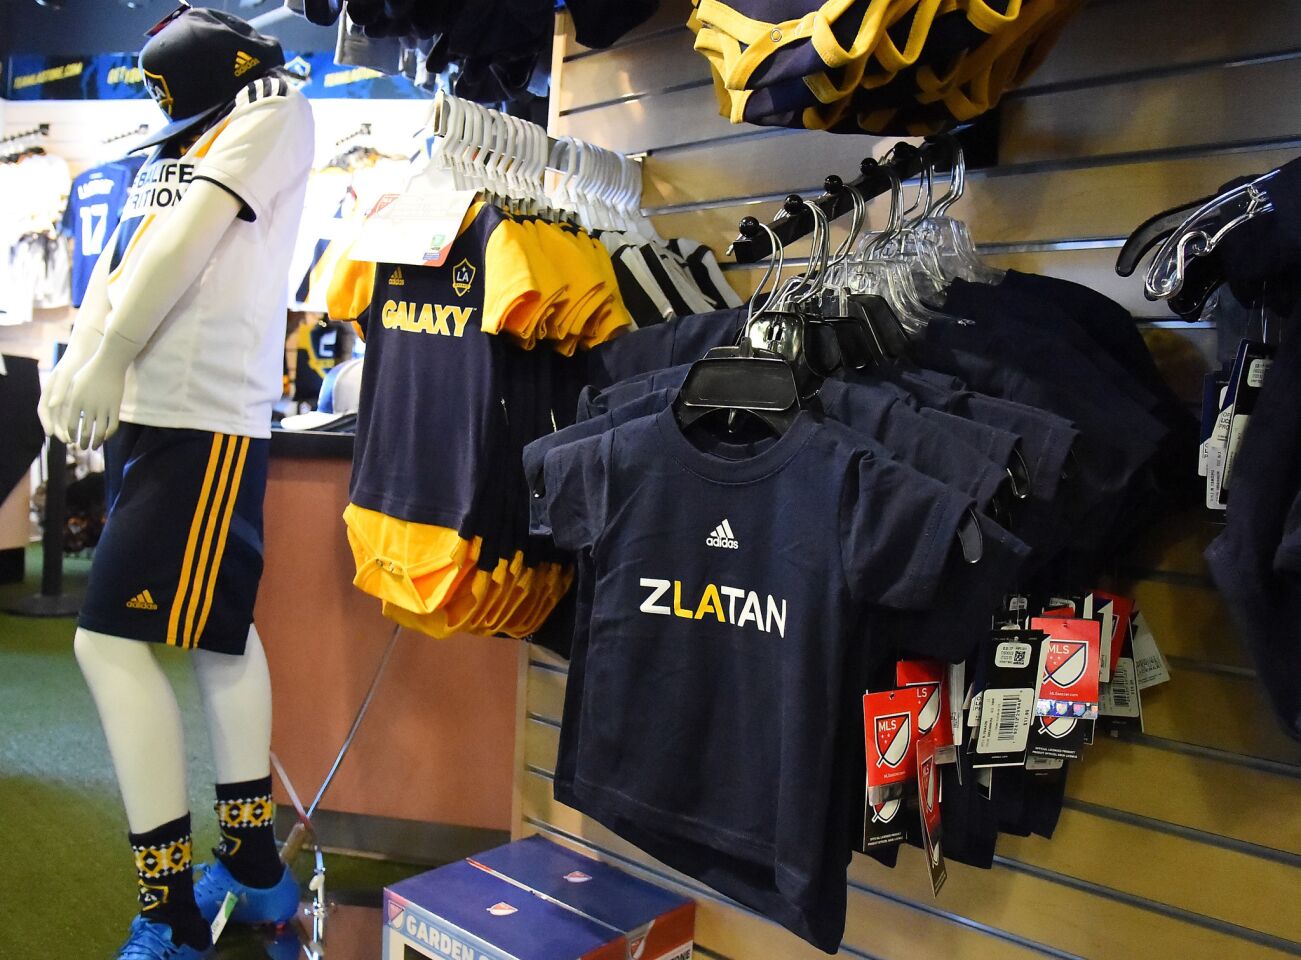 CARSON, CA - MARCH 30: Zlatan Ibrahimovic merchandise for sale in the Los Angeles Galaxy team store at StubHub Center on March 30, 2018 in Carson, California. (Photo by Jayne Kamin-Oncea/Getty Images) ** OUTS - ELSENT, FPG, CM - OUTS * NM, PH, VA if sourced by CT, LA or MoD **